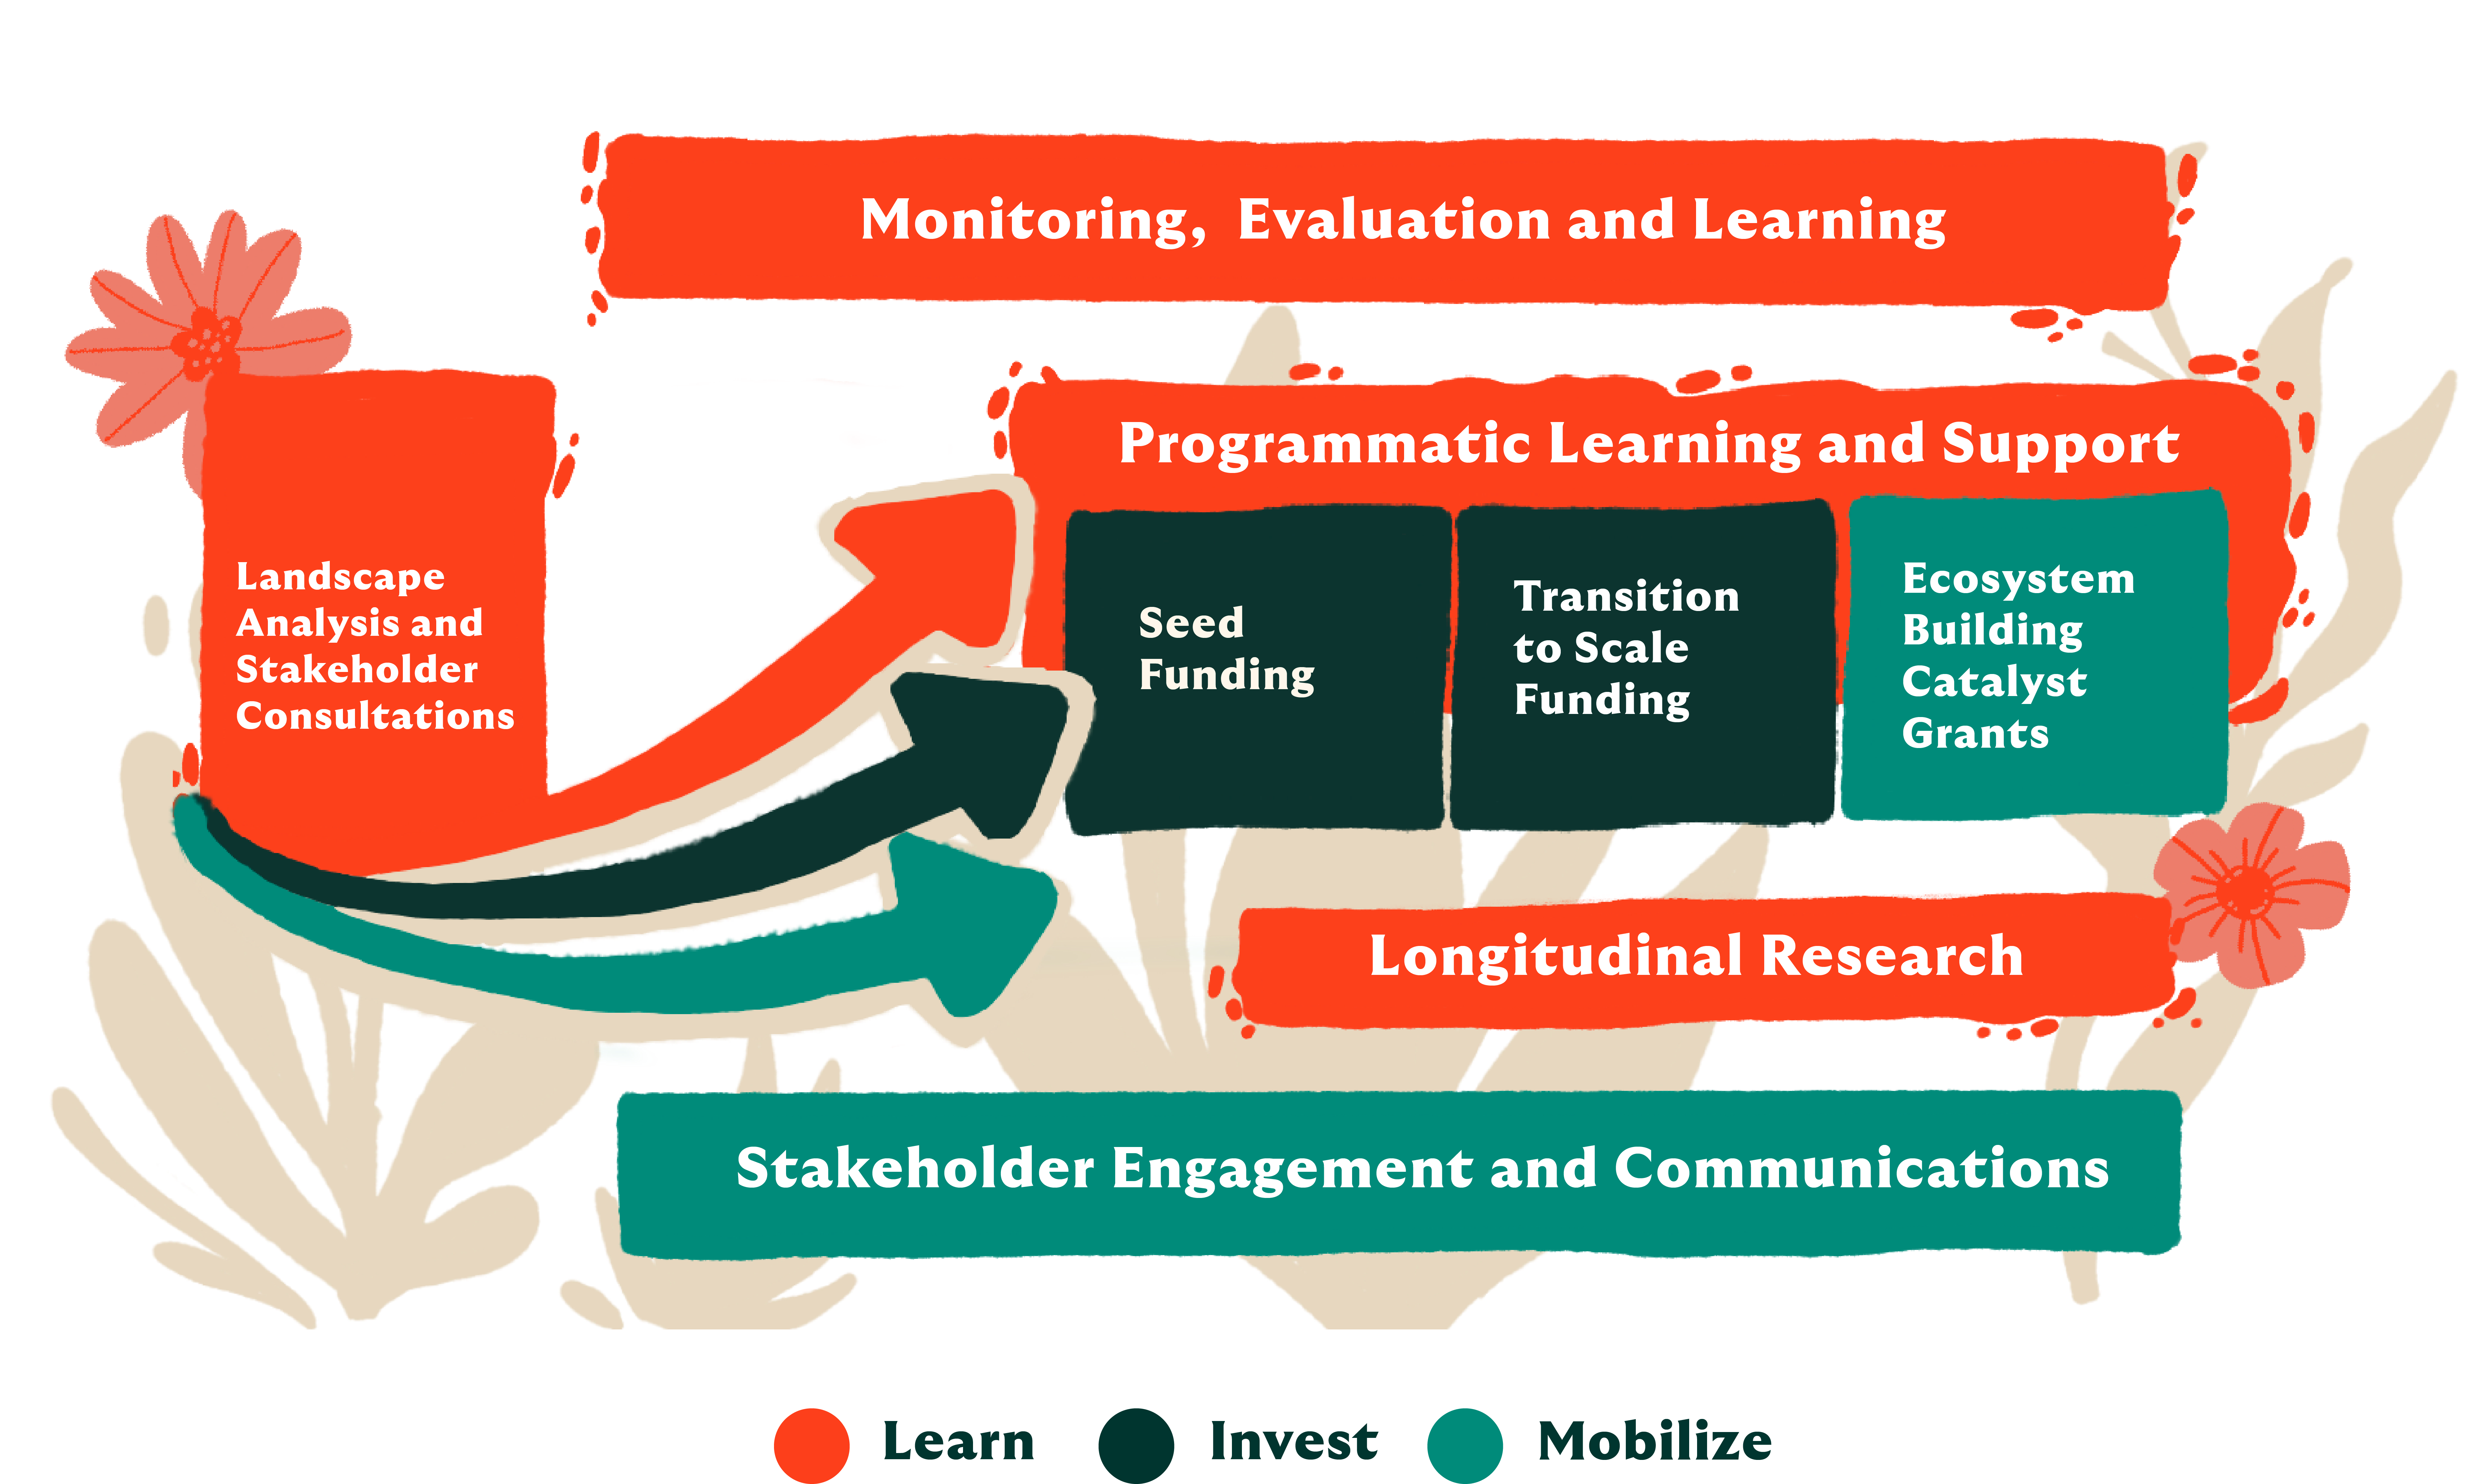 A programmatic diagram depicting how the landscape analyses and country consultations we support will help inform all of the initiative’s funding and programming in research, innovation and ecosystem building.